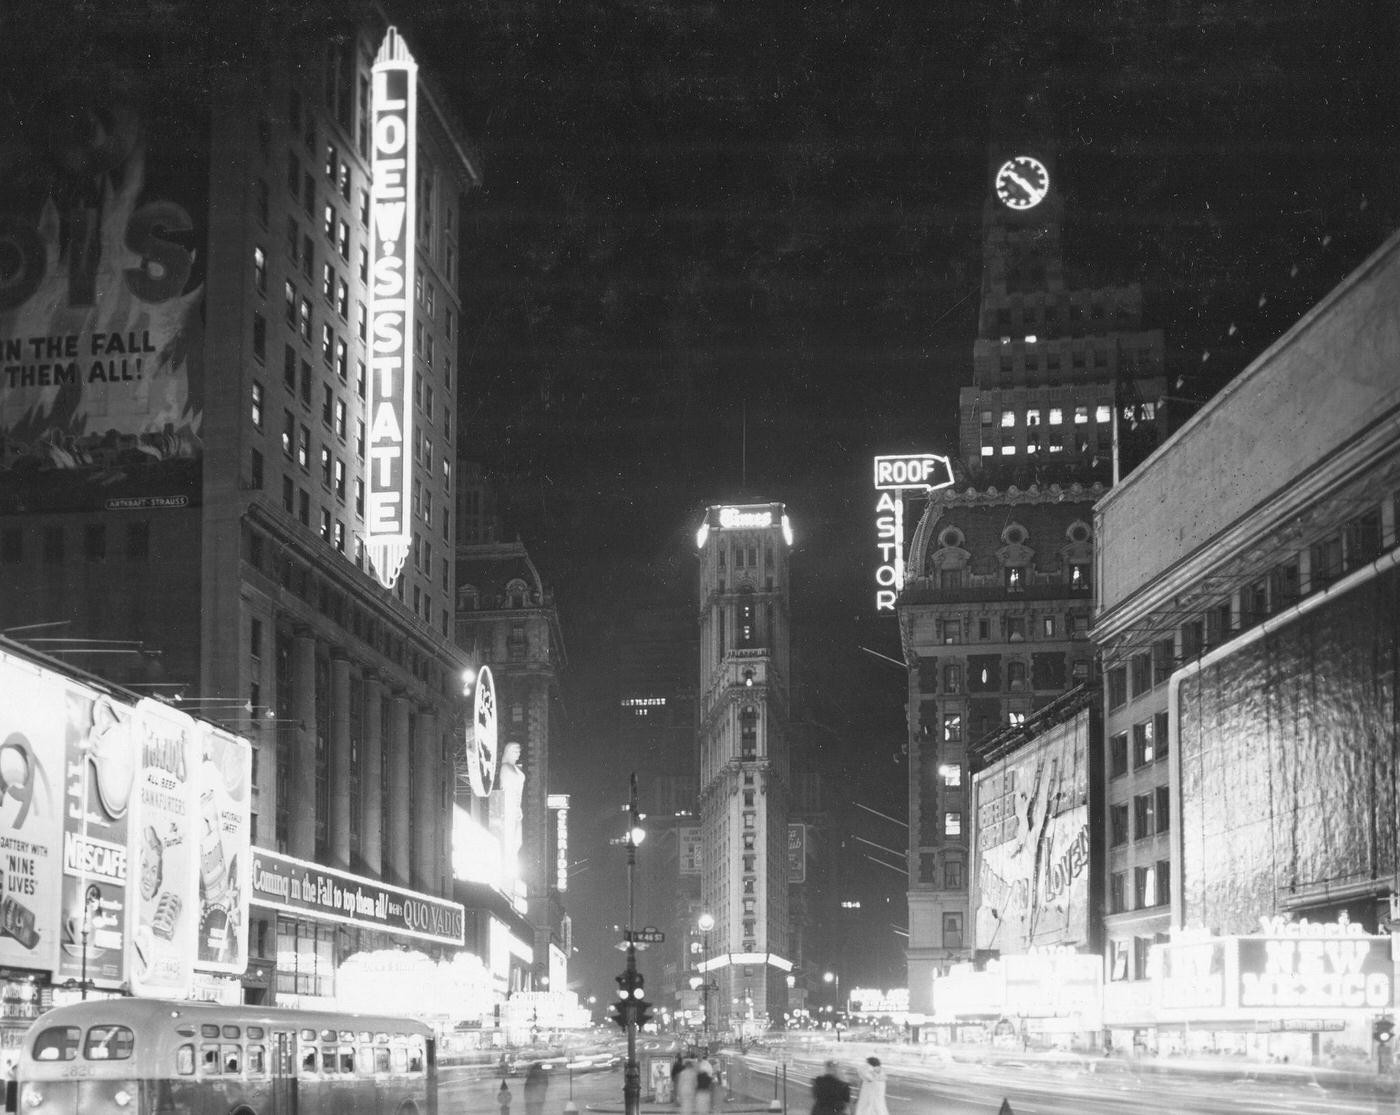 Times Square At Night Looking South Toward The New York Times Building, Manhattan, 1951